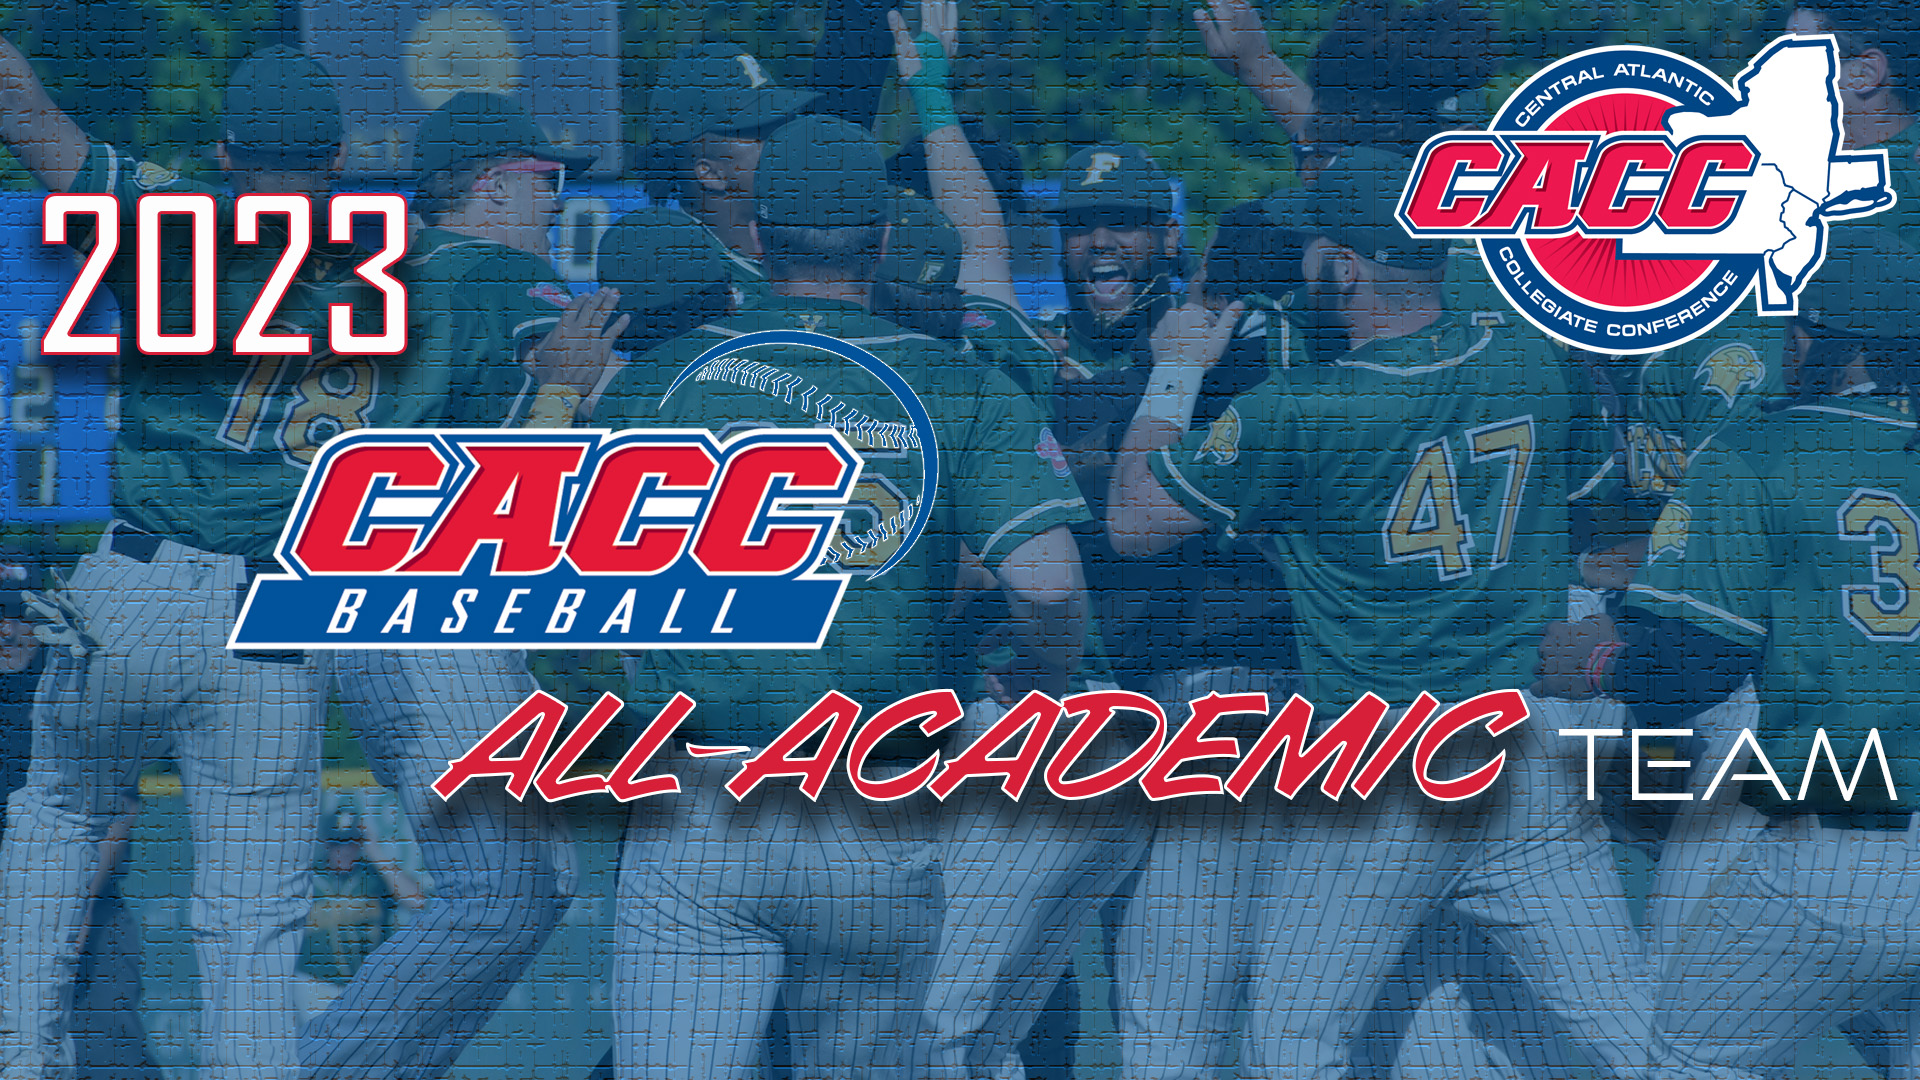 58 S-As Named to 2023 CACC Baseball All-Academic Team